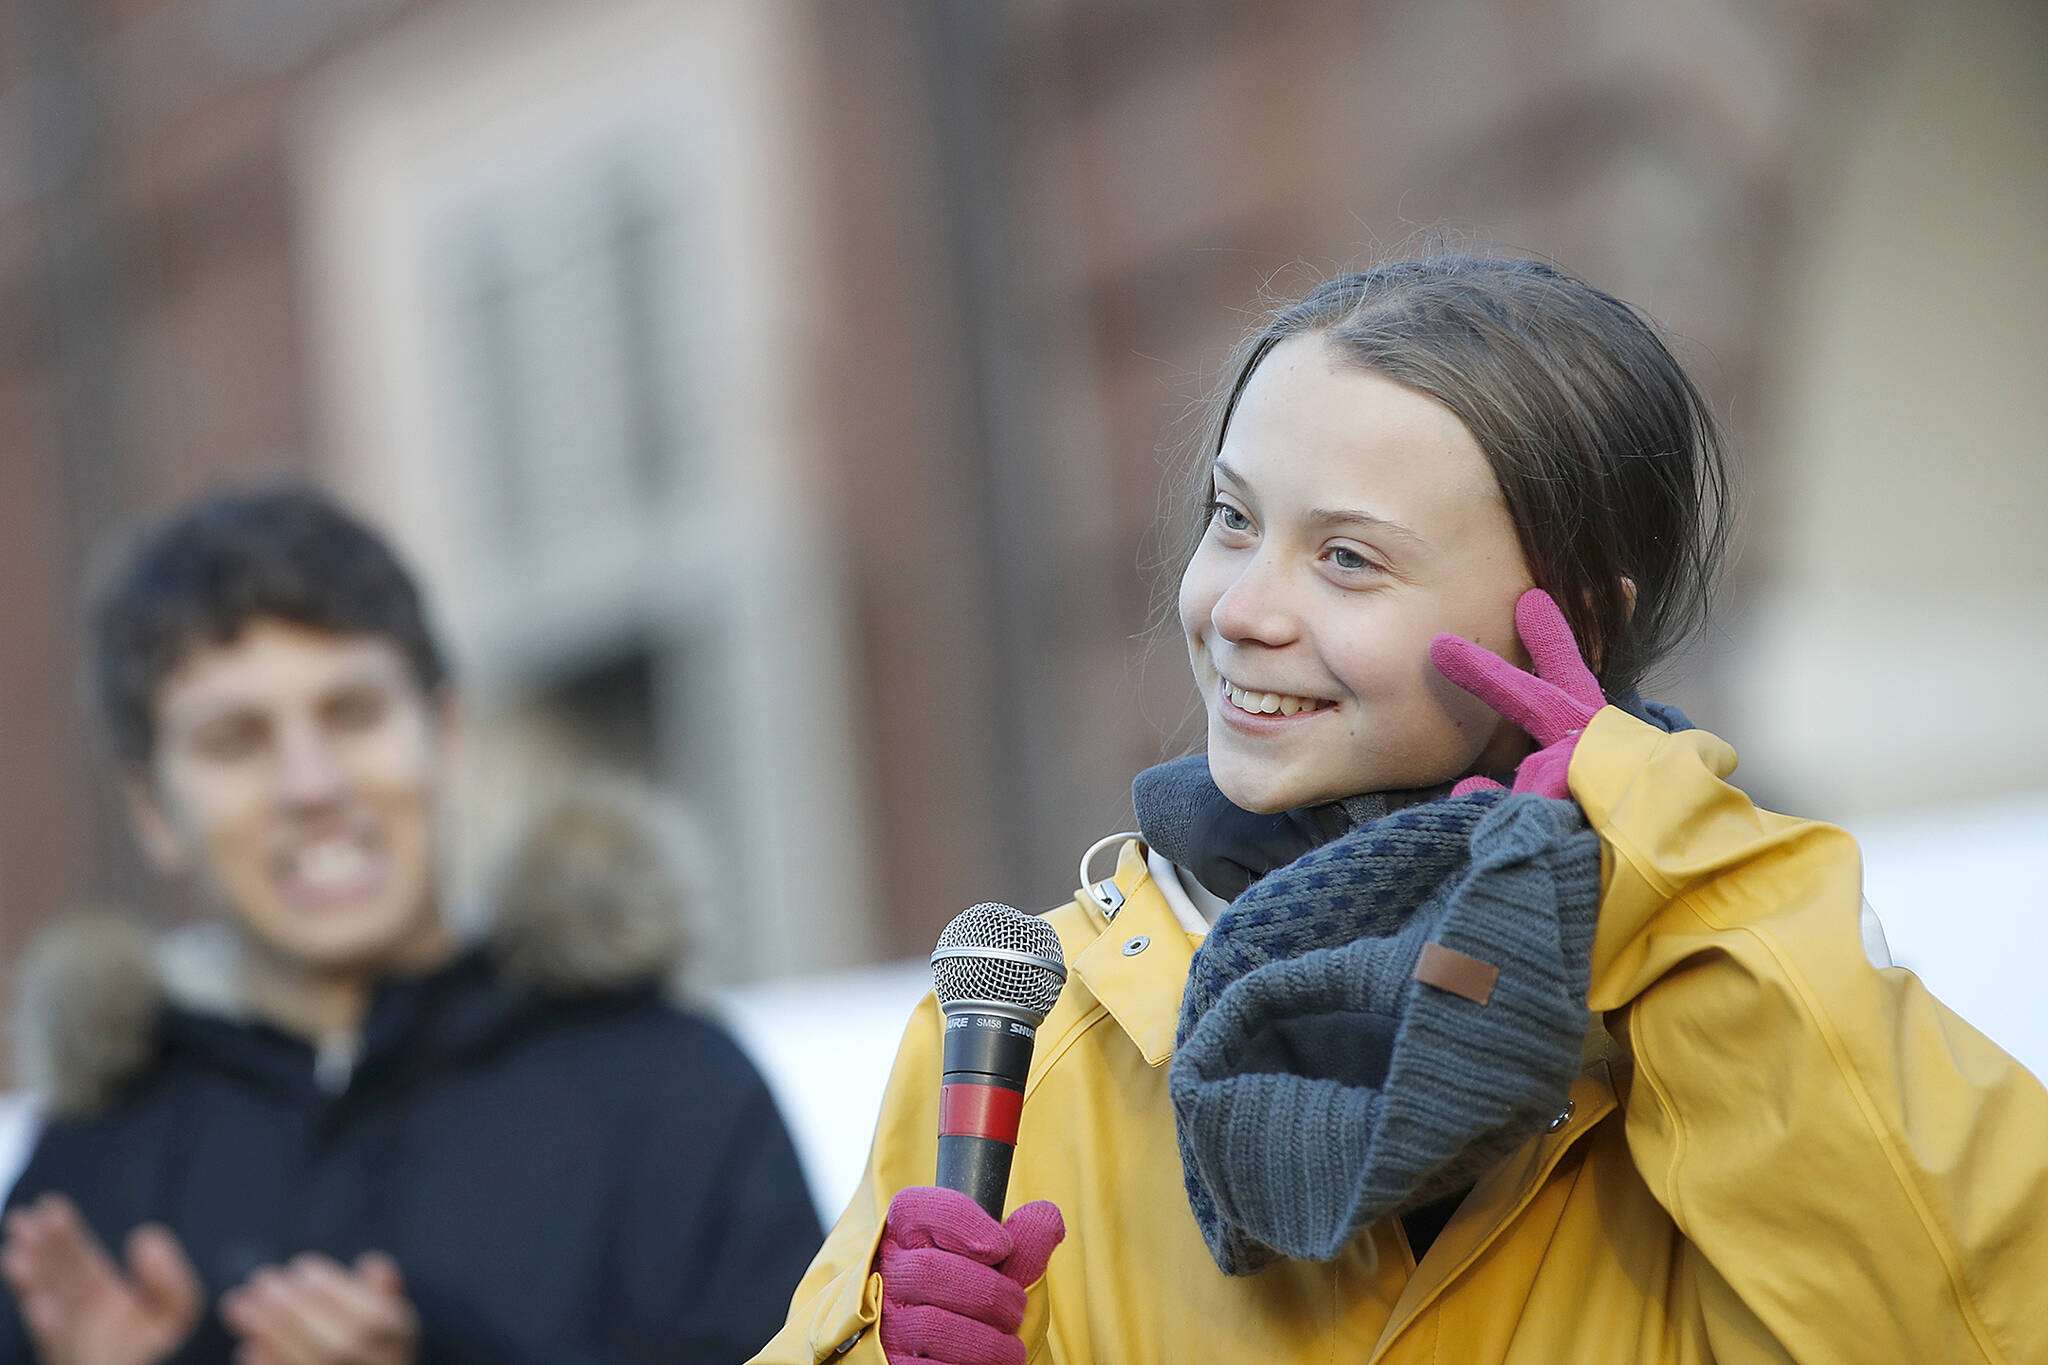 Swedish environmental activist Greta Thunberg attends a climate march, in Turin, Italy, Friday. Dec. 13, 2019. In which year was she born? (AP Photo/Antonio Calanni)